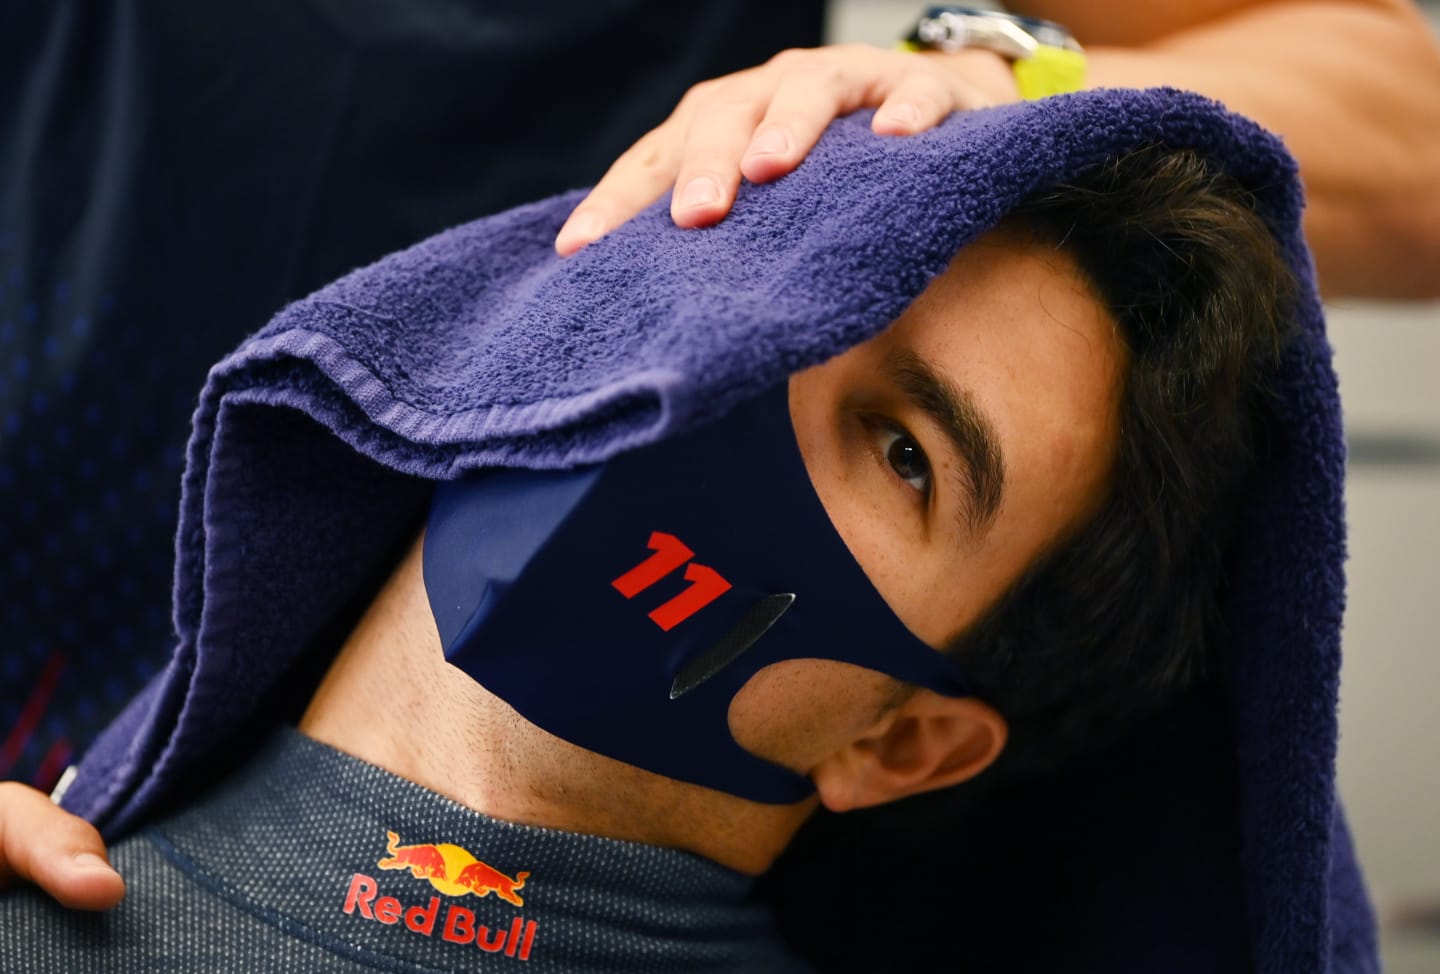 ZANDVOORT, NETHERLANDS - SEPTEMBER 04: Sergio Perez of Mexico and Red Bull Racing prepares to drive in the garage during final practice ahead of the F1 Grand Prix of The Netherlands at Circuit Zandvoort on September 04, 2021 in Zandvoort, Netherlands. (Photo by Dan Mullan/Getty Images)